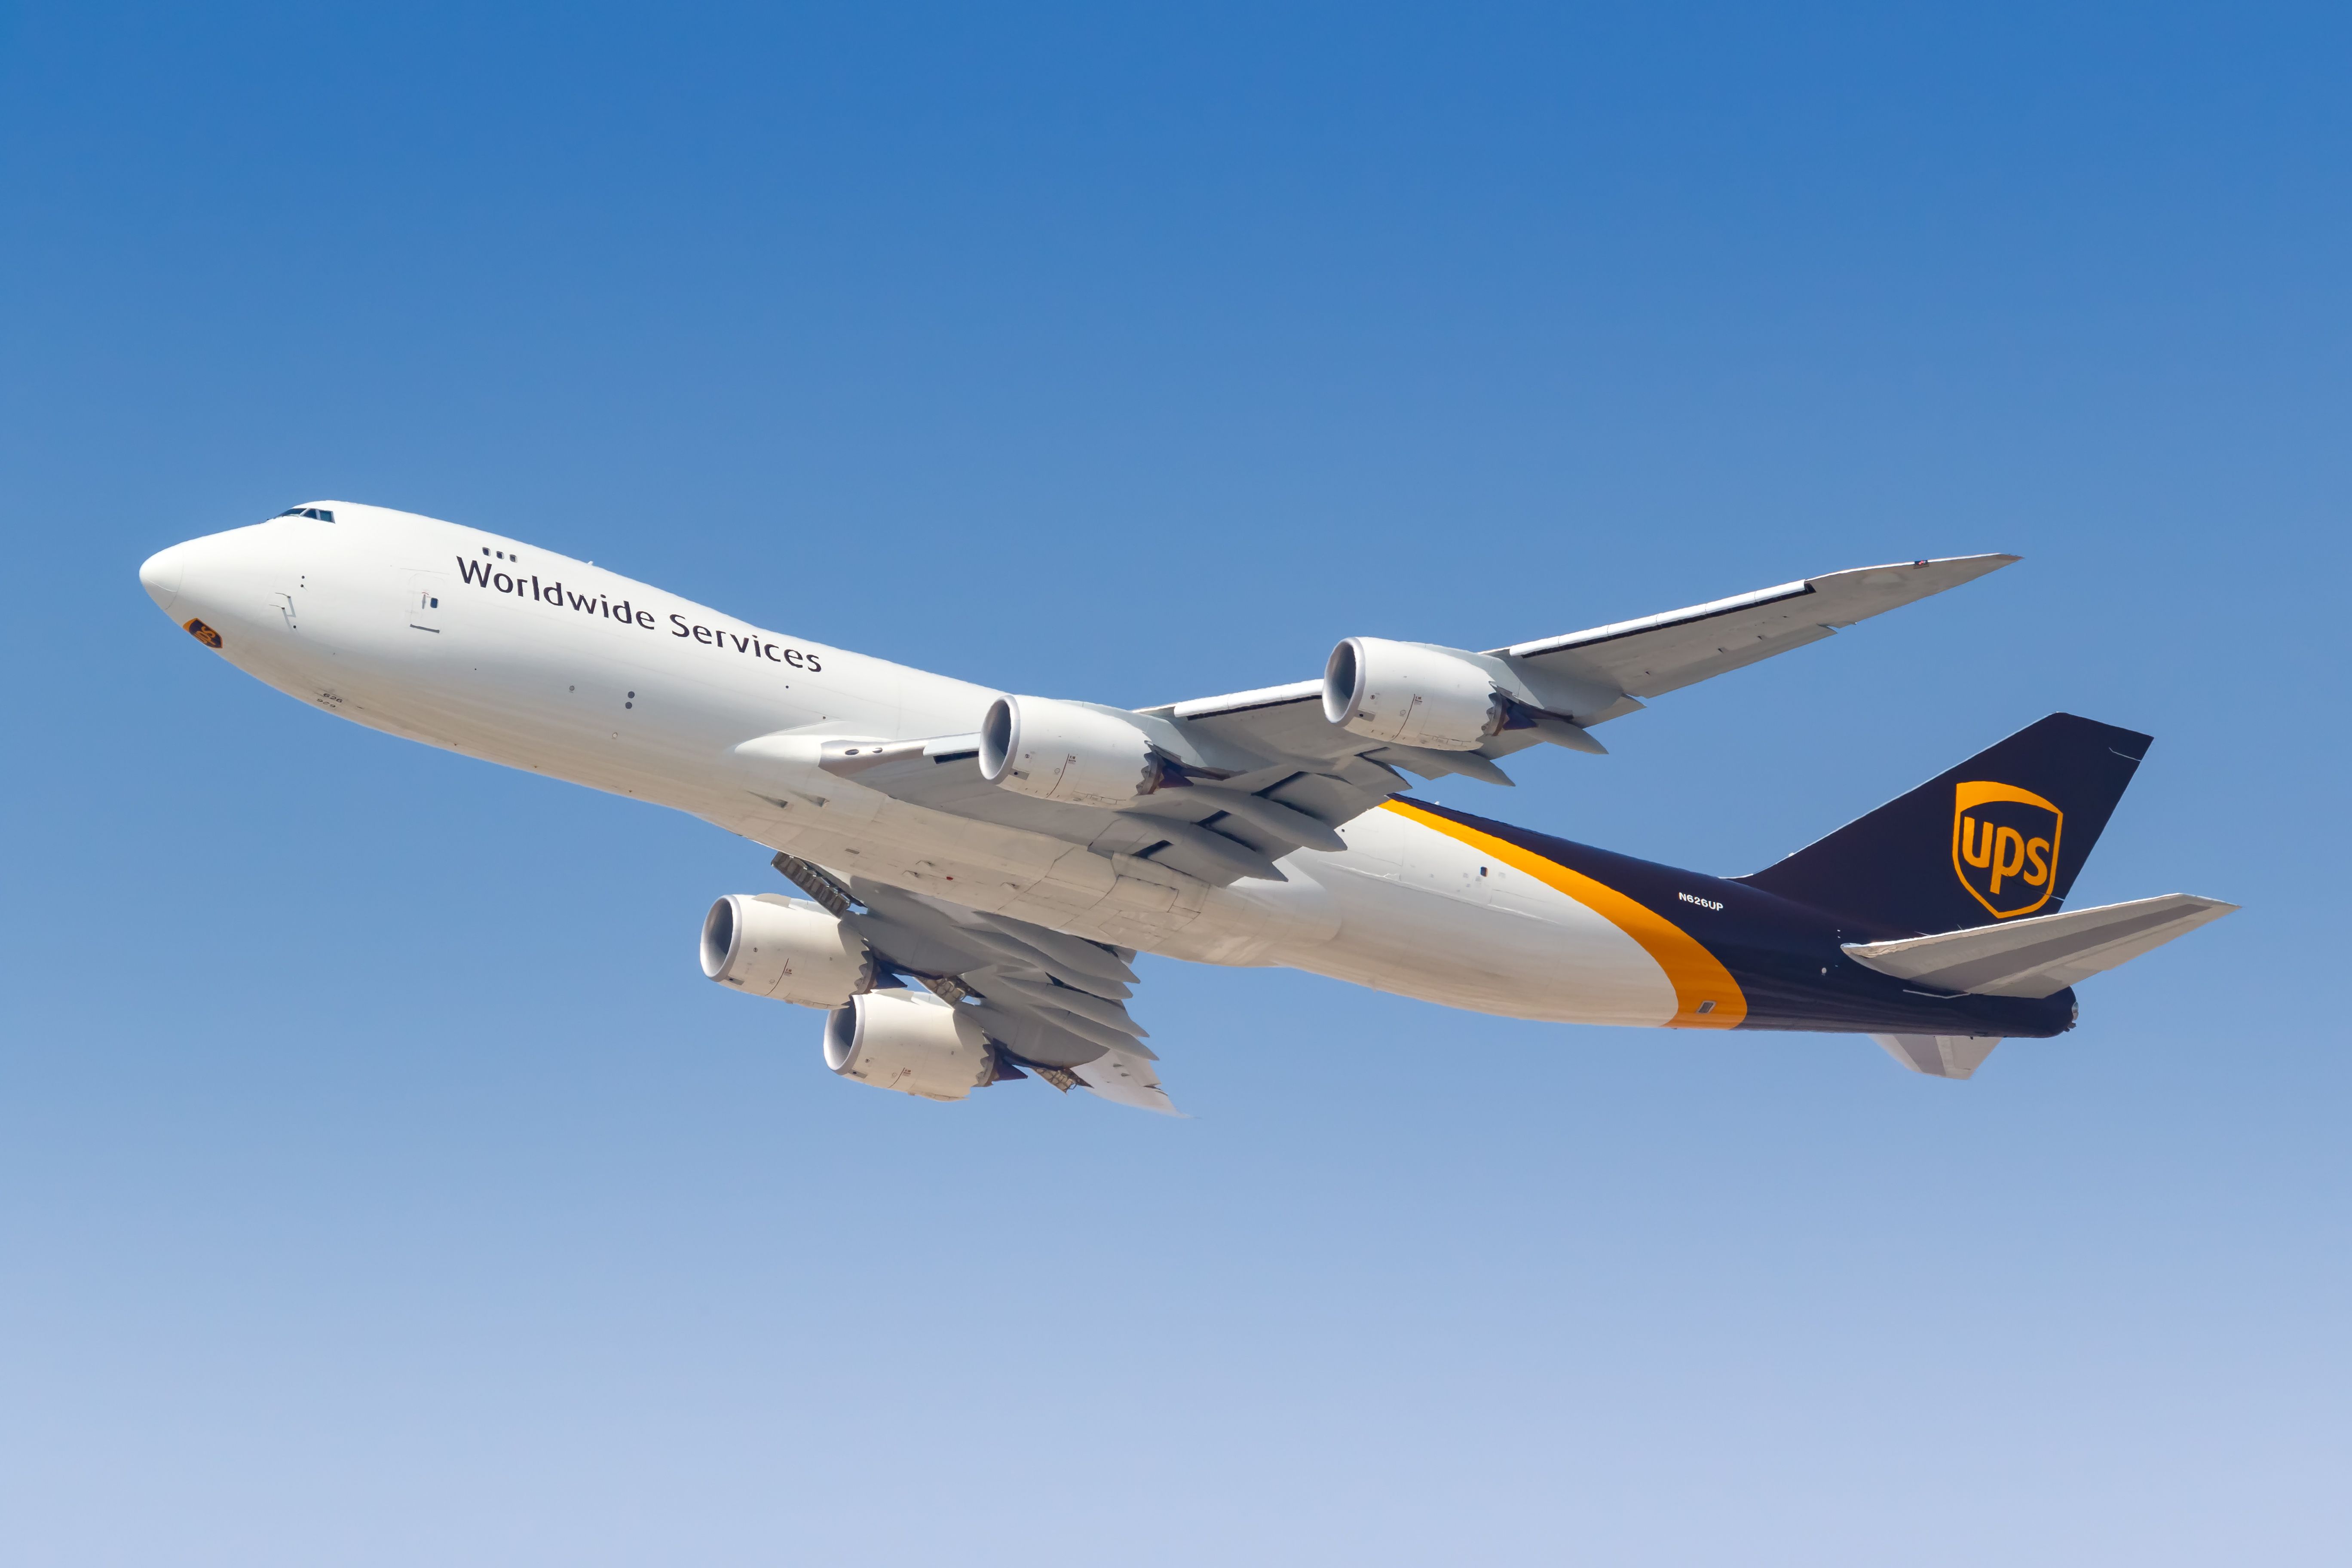 A UPS Boeing 747-8F aircraft flying in the sky.